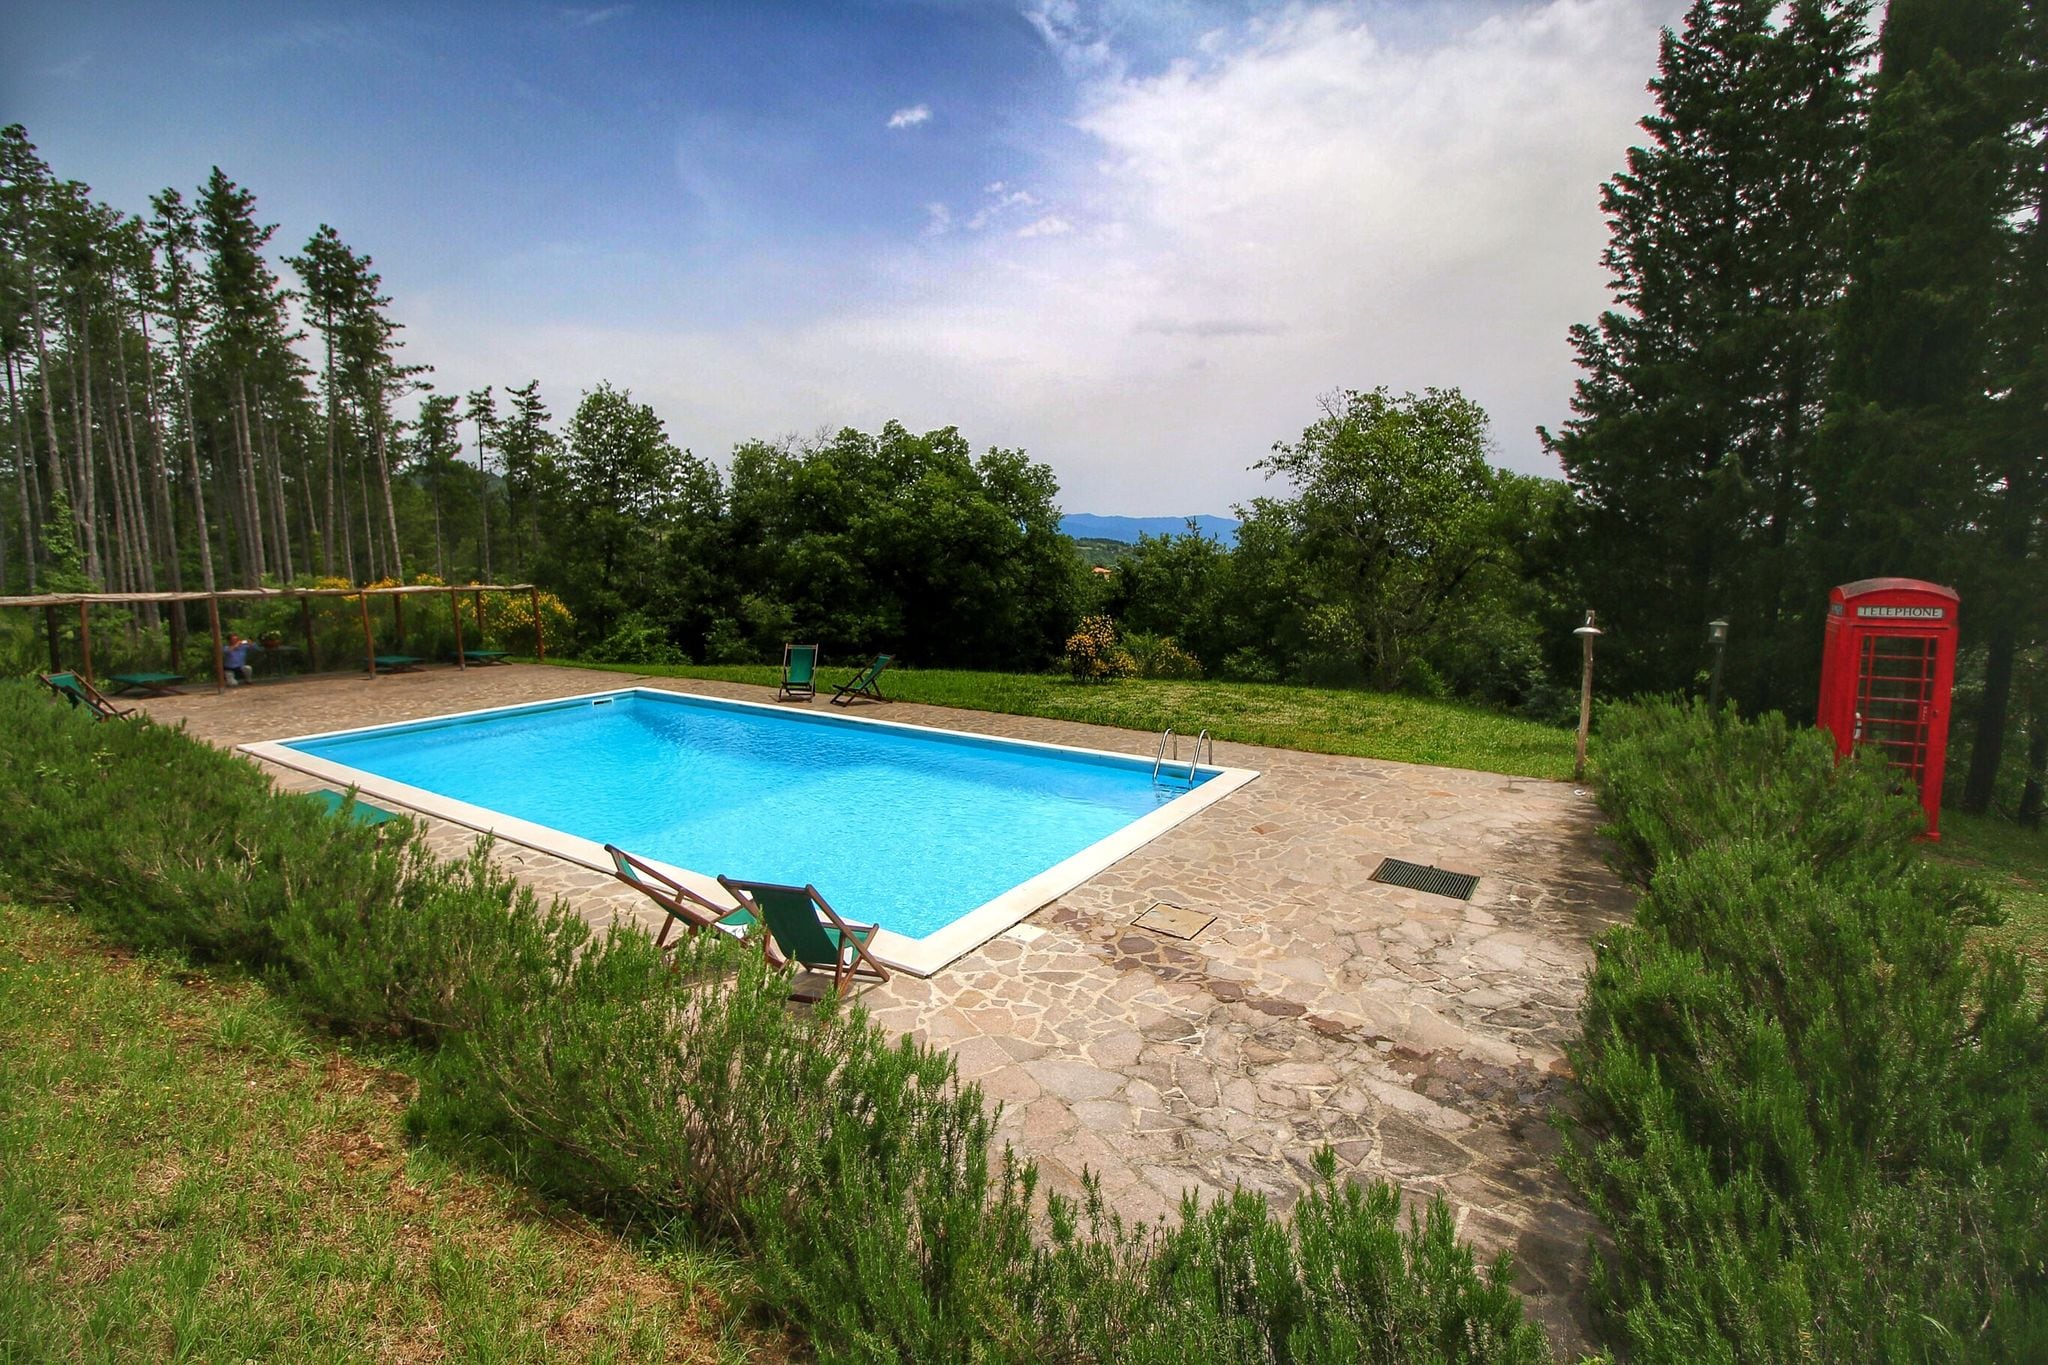 Small medieval hamlet of Italian marquis, pool, nice view